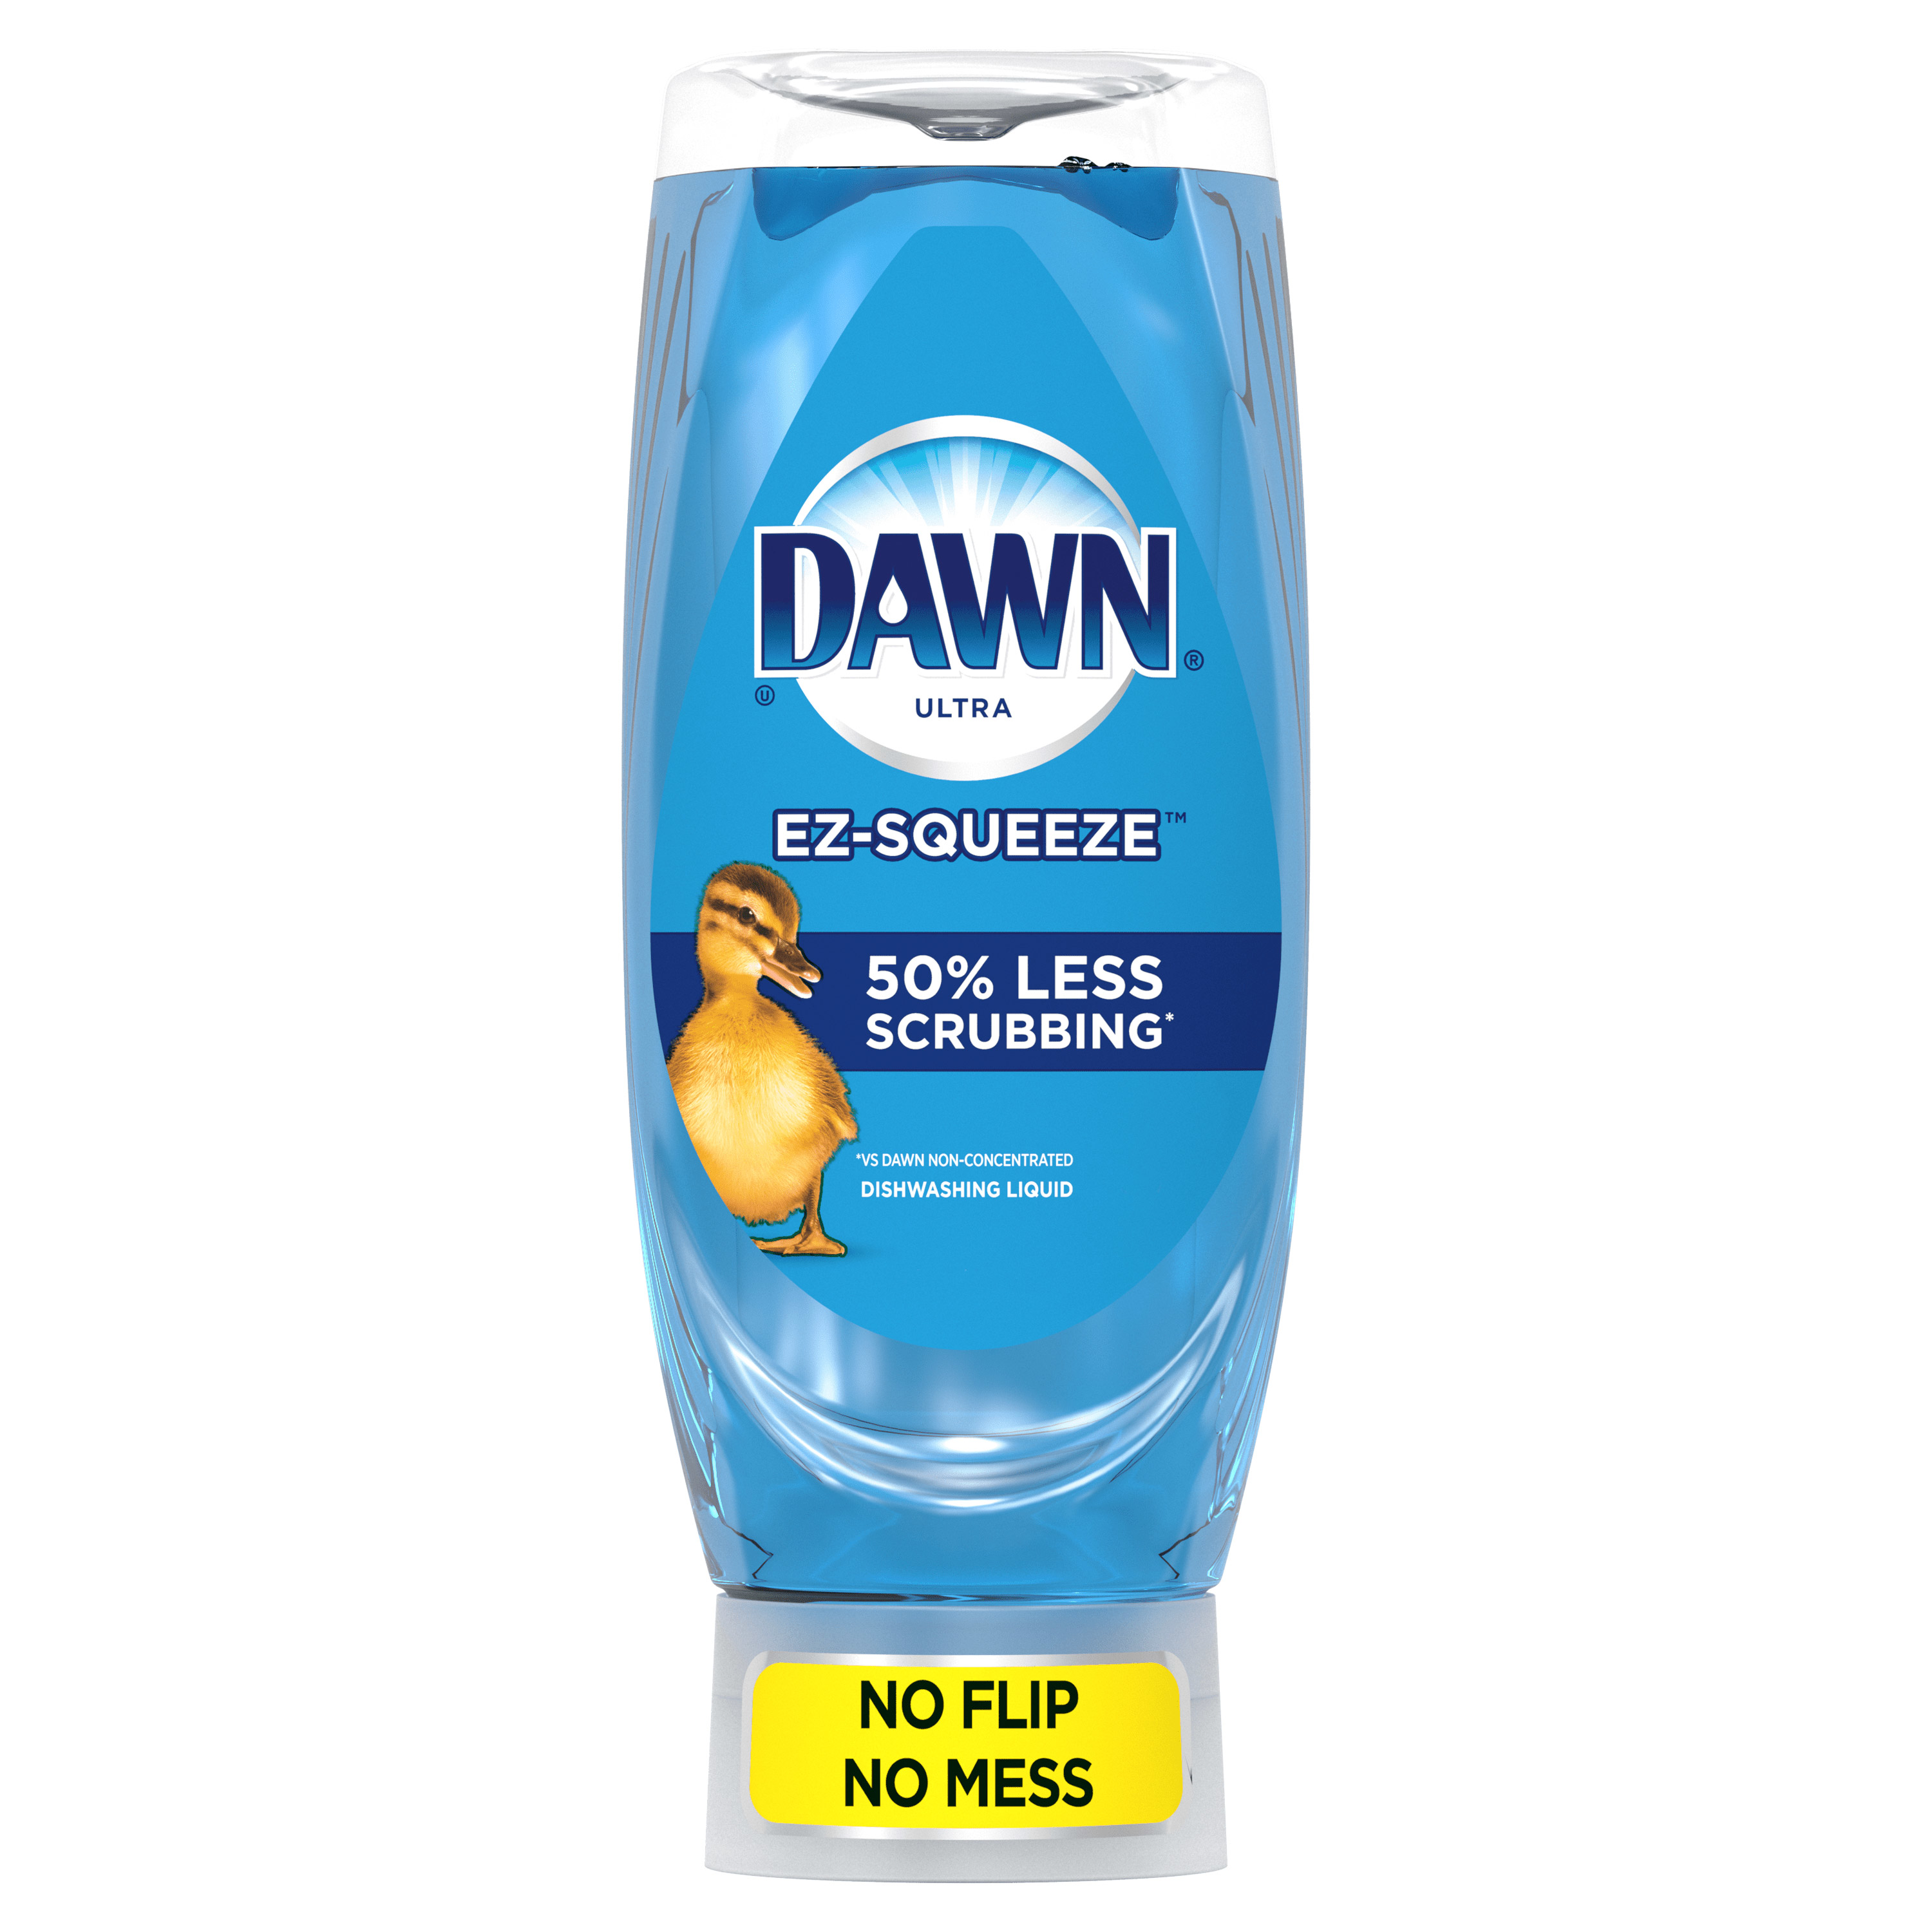 Dawn Dishwashing Products - All Products